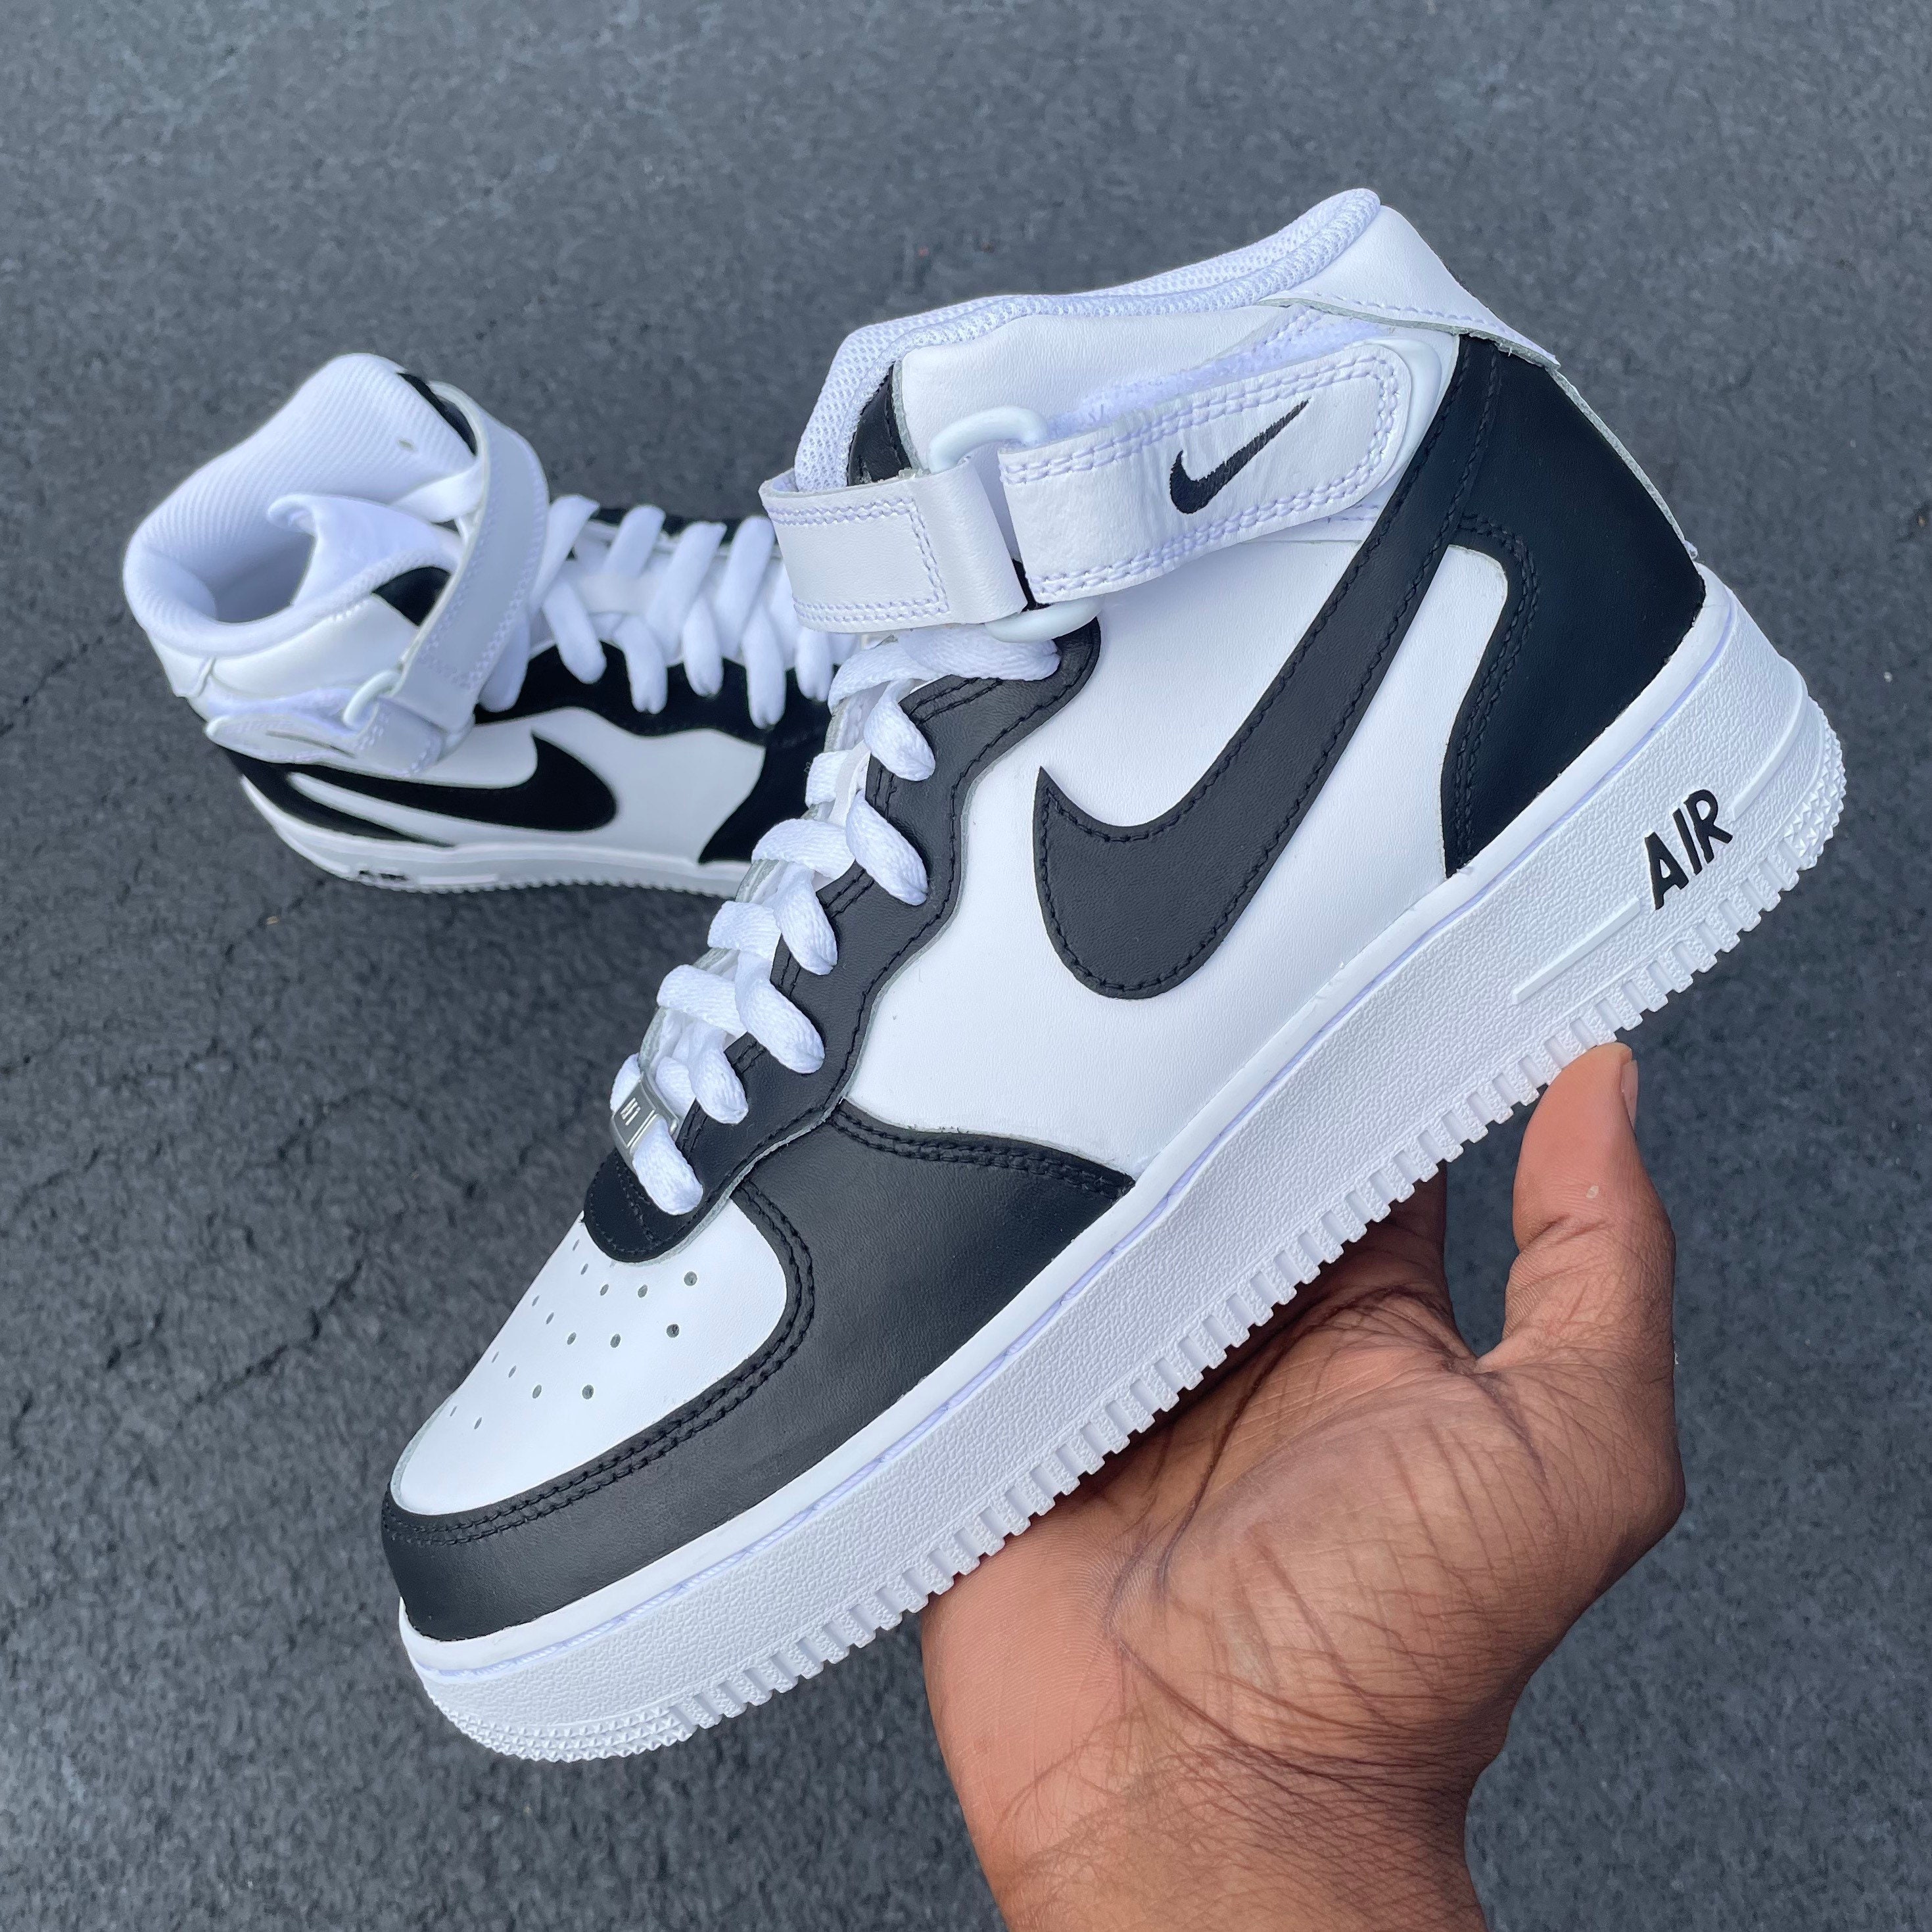 Nike Air Force 1 High By You Men's Custom Shoes